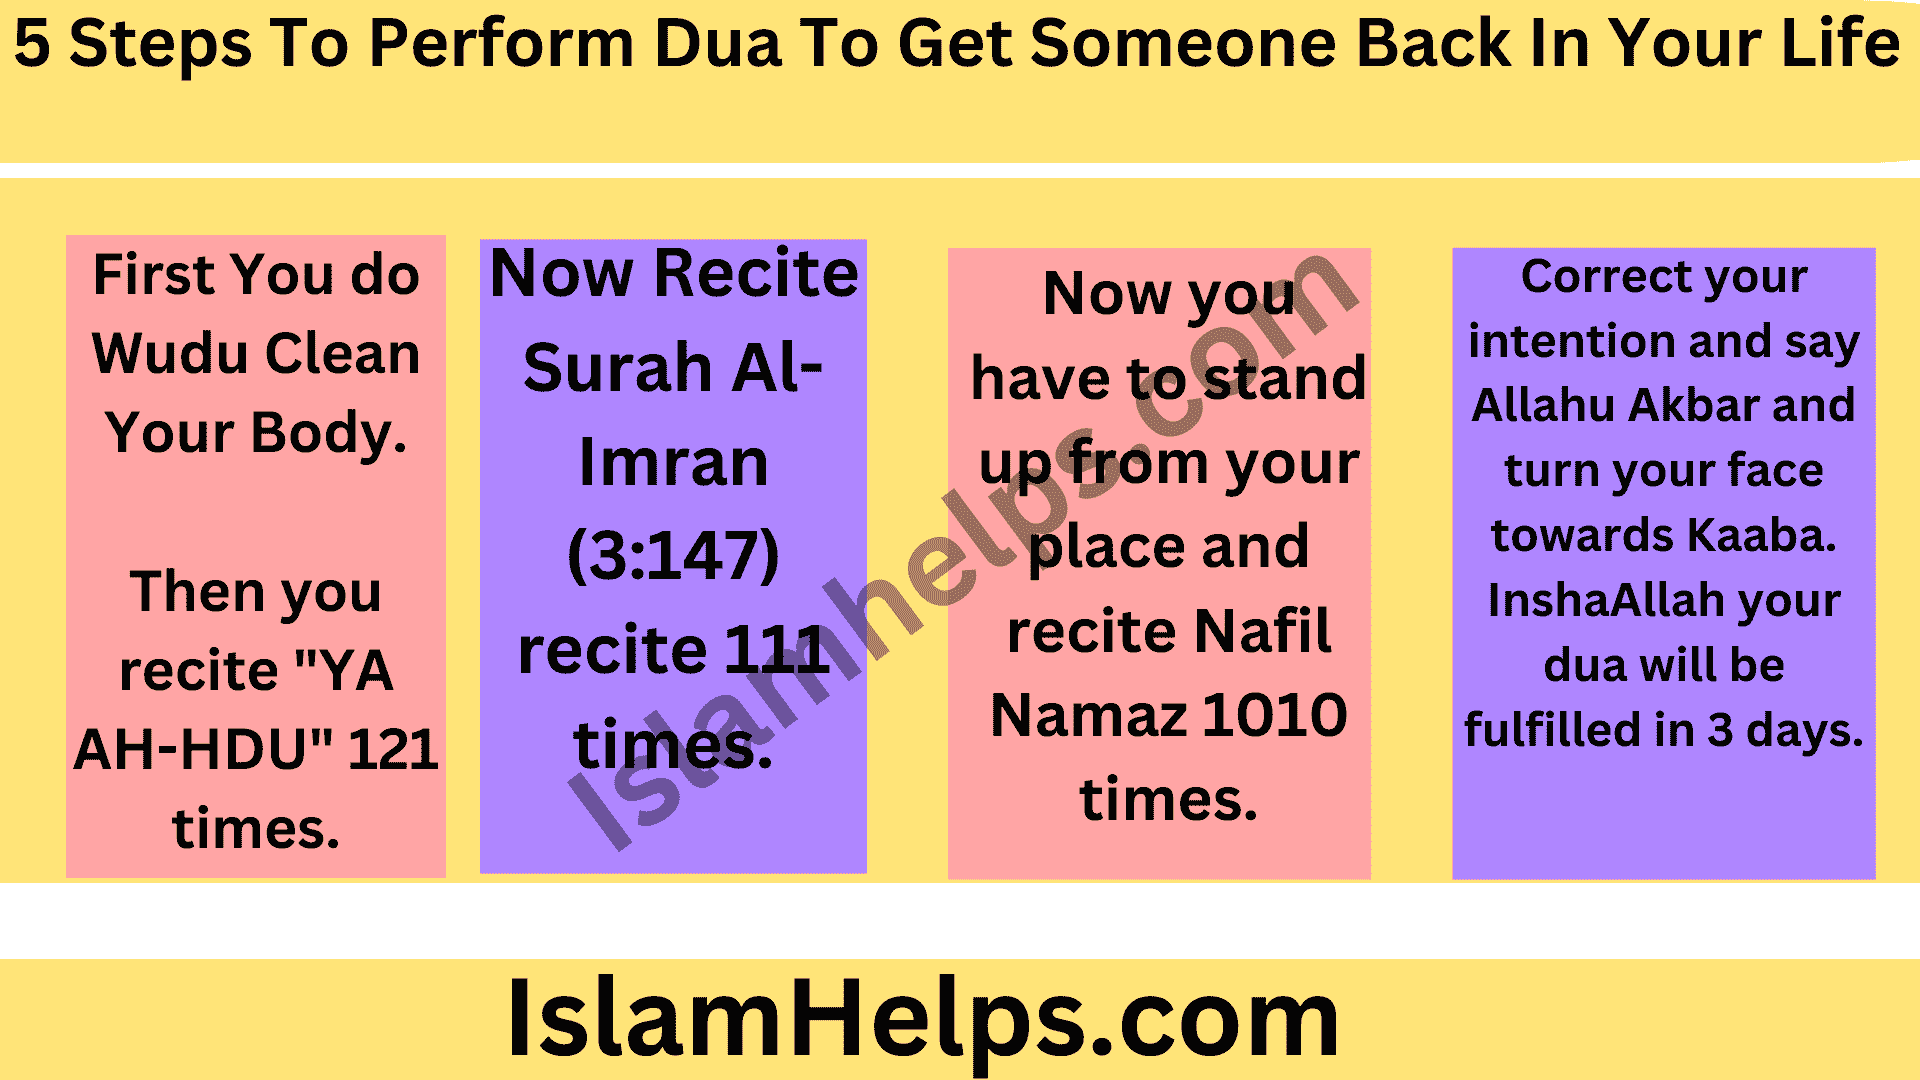 5 Steps To Perform Dua To Get Someone Back In Your Life 